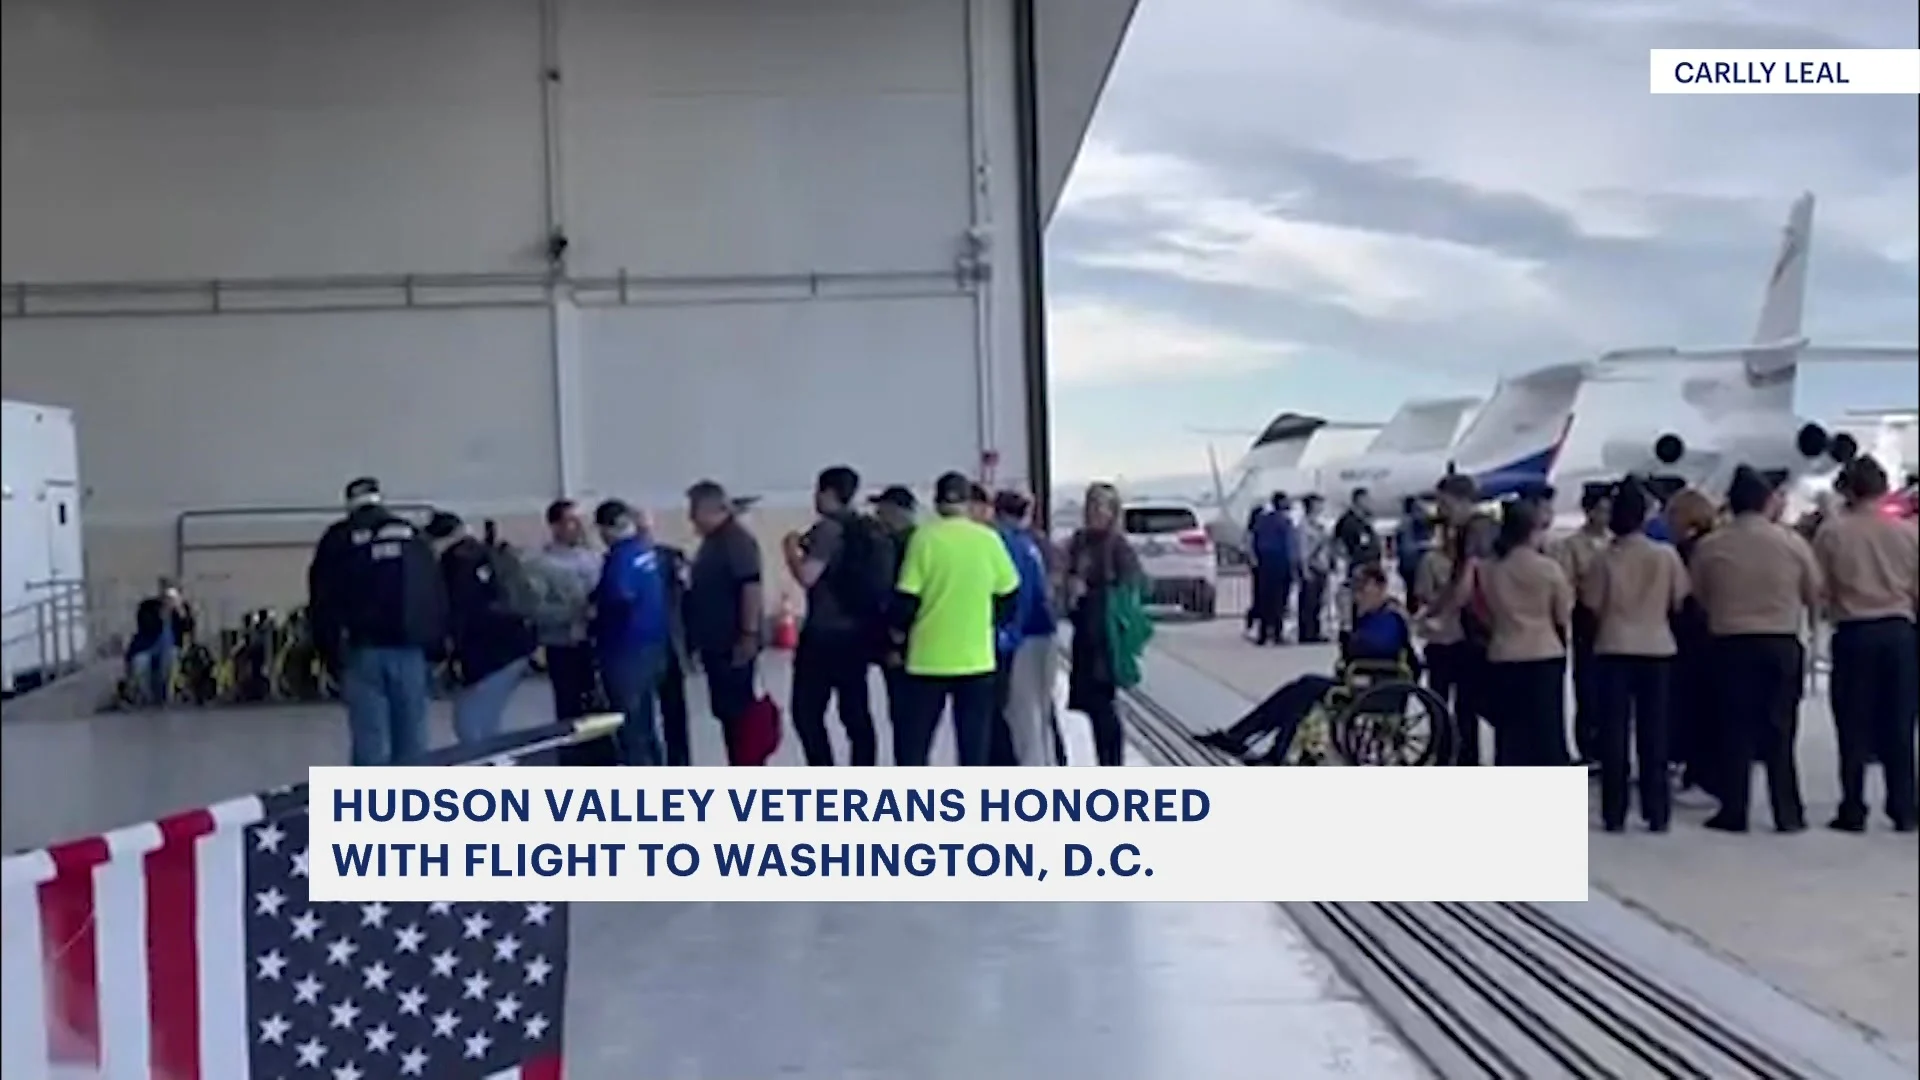 Hudson Valley veterans honored with flight to visit Washington DC